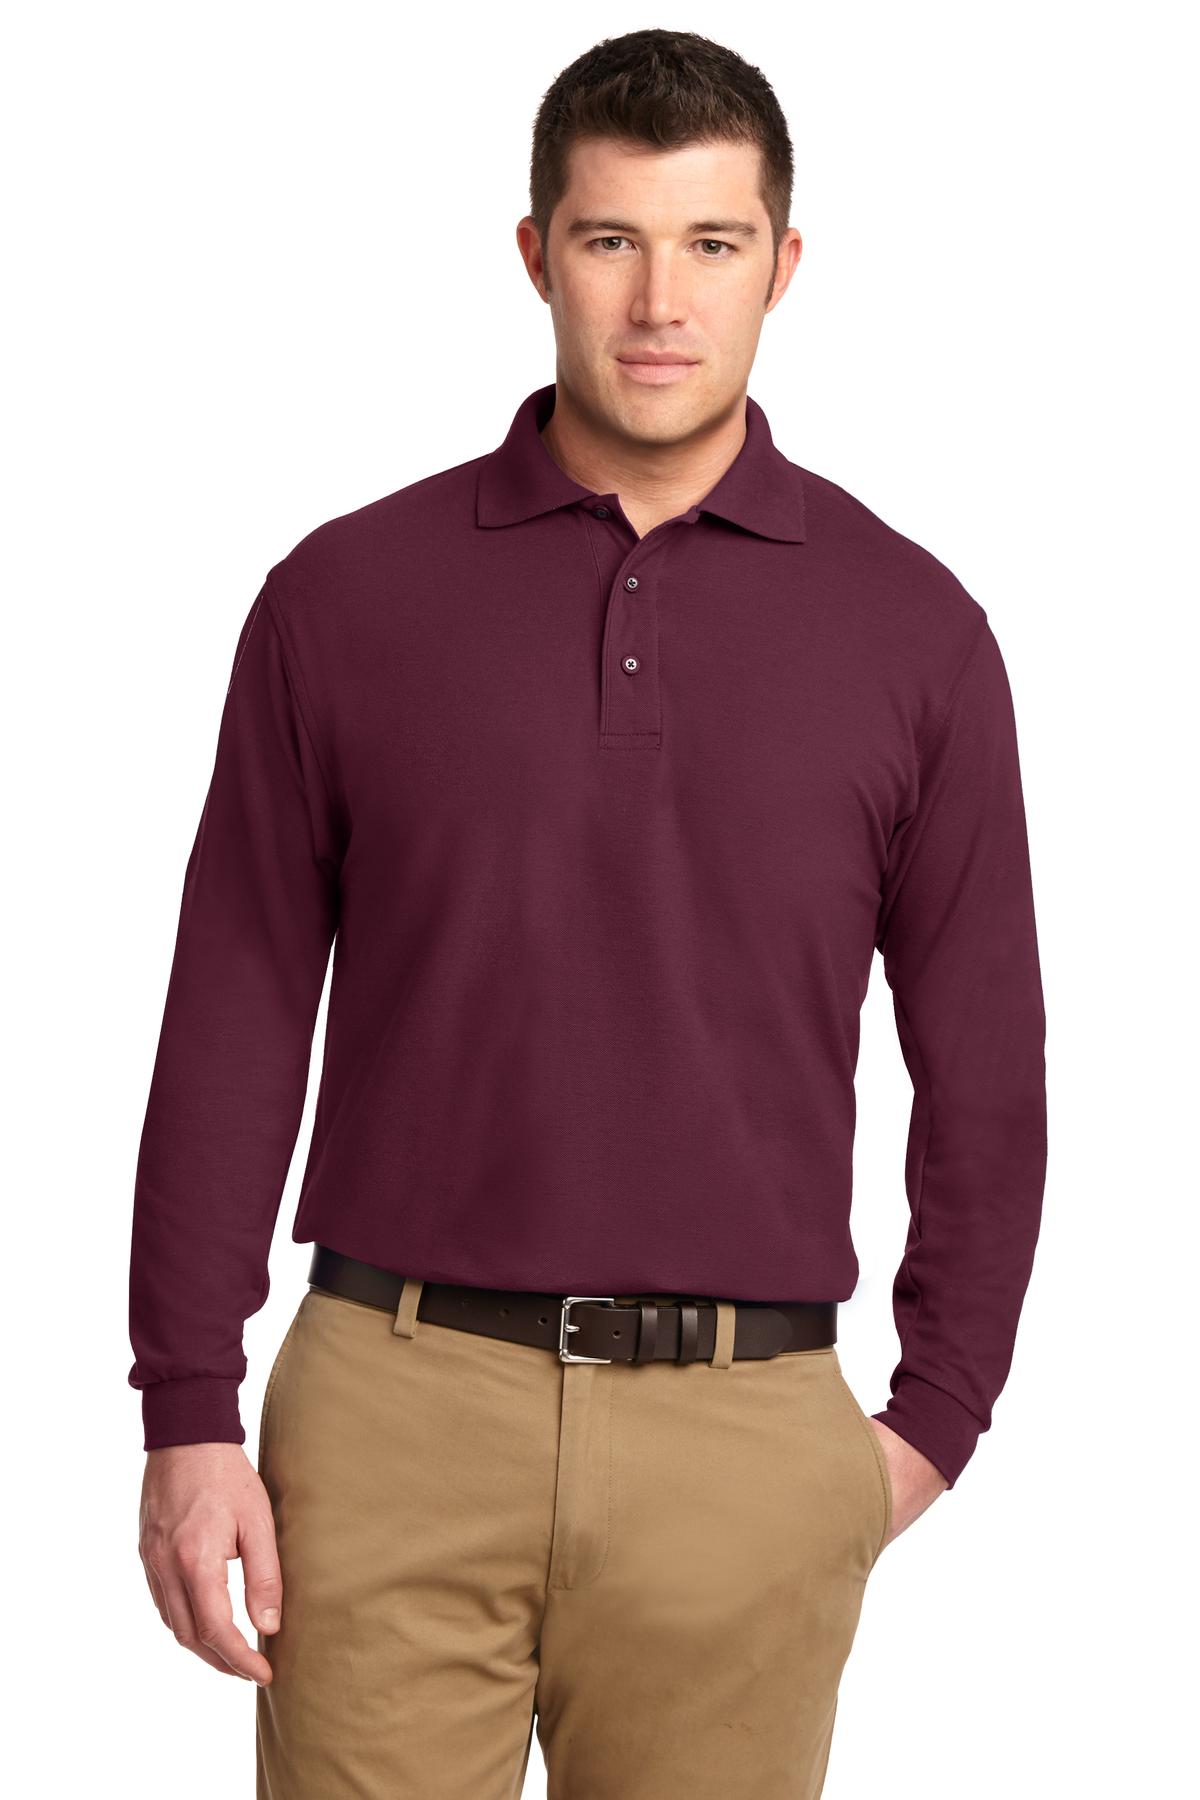 K500LSP Mens Port Authority Long Sleeve Silk Touch Polo with Pocket 